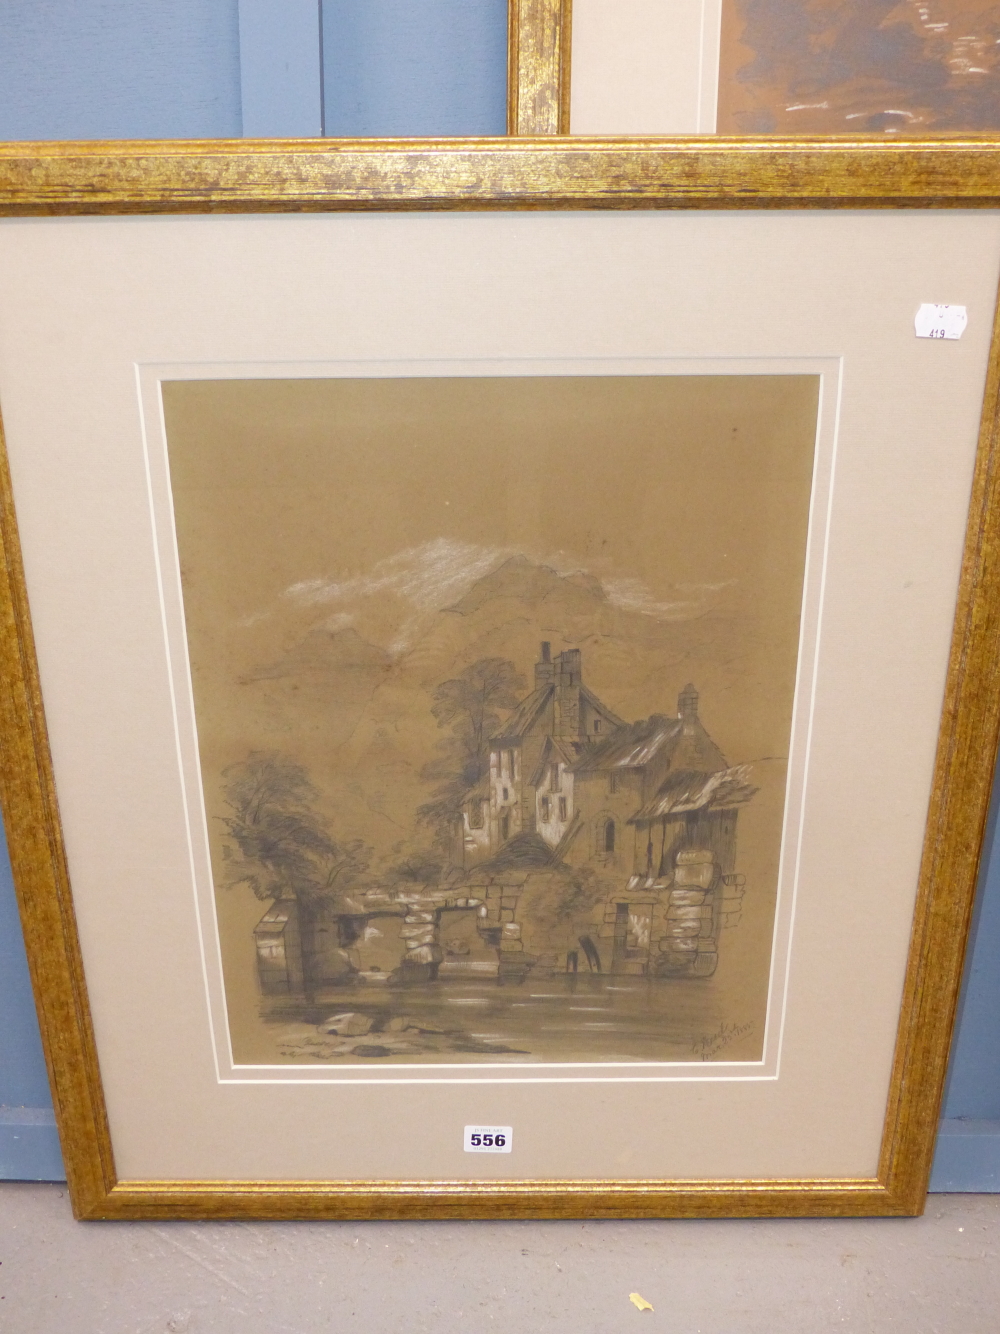 E. STEED (?) (19TH CENTURY), A PAIR OF VIEWS OF CONTINENTAL BUILDINGS, INDISTINCTLY SIGNED, DATED - Image 3 of 4